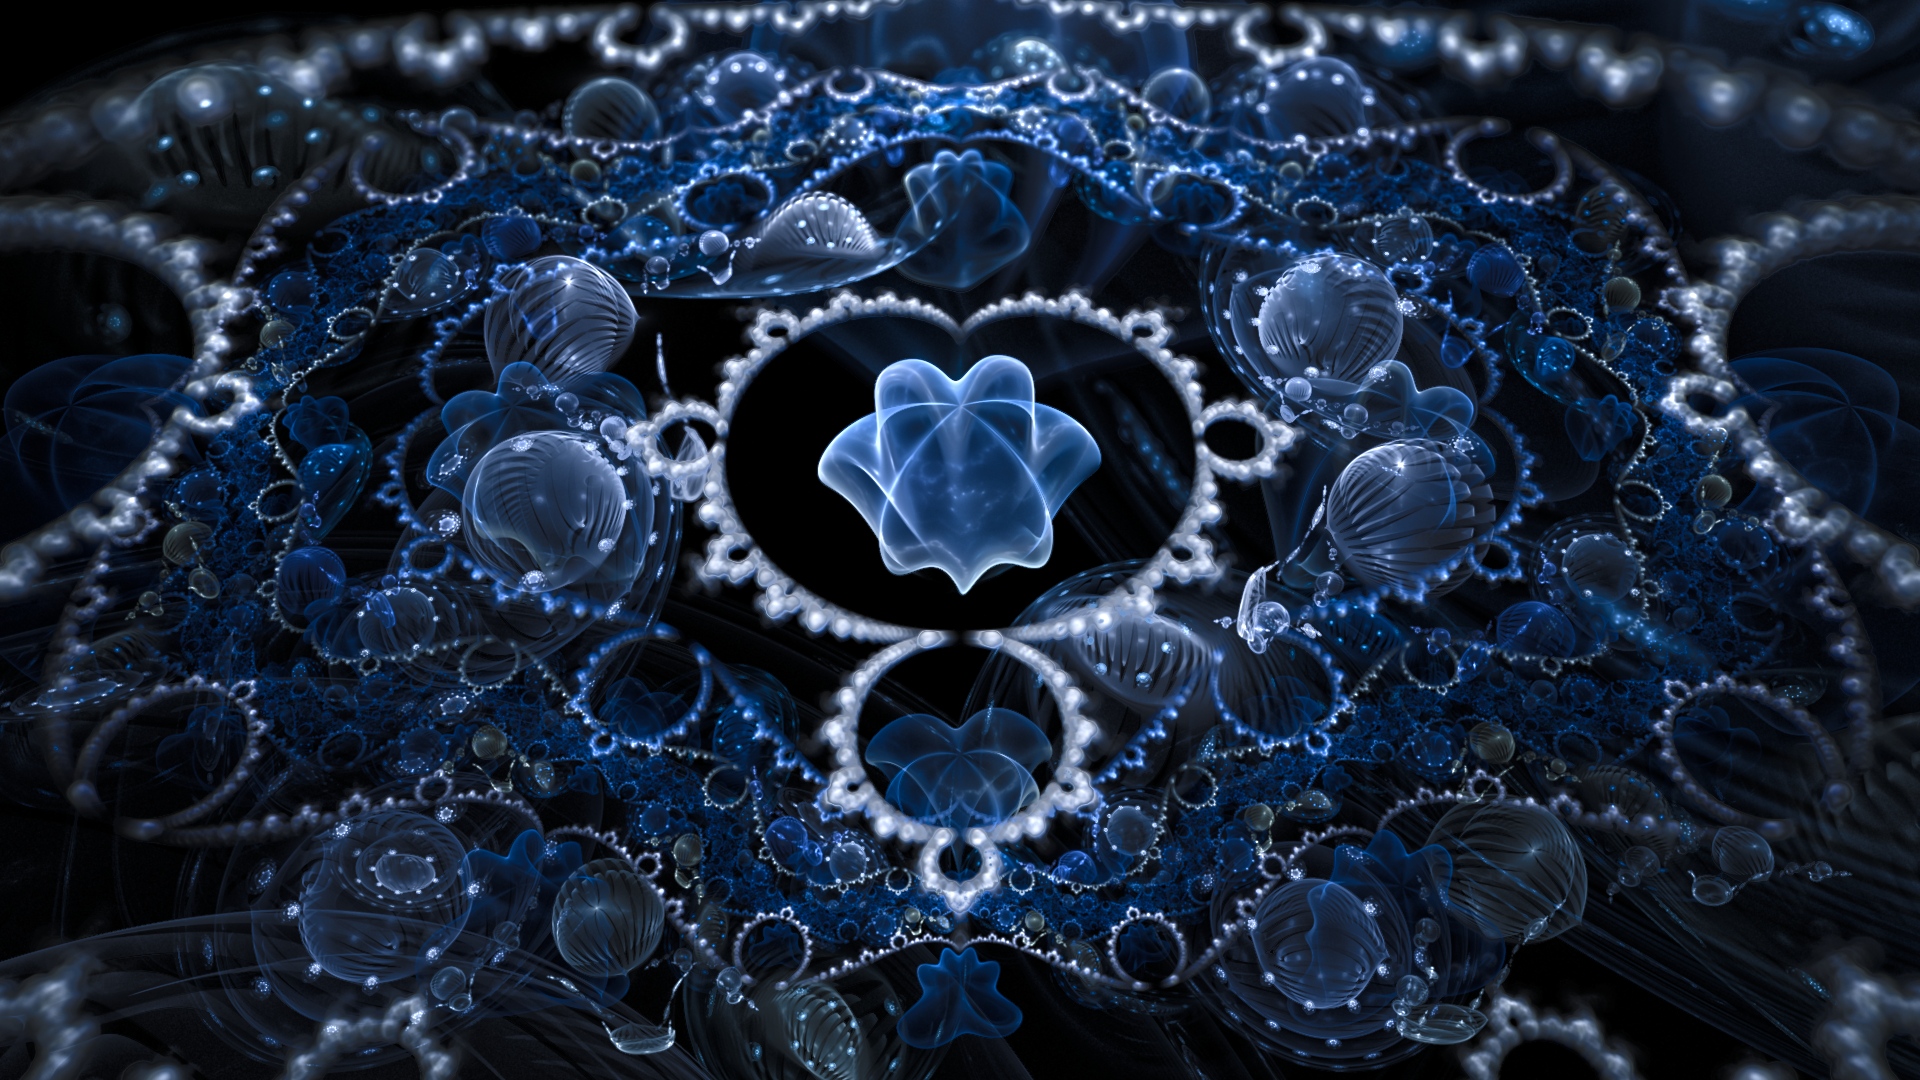 Mandelbrot Collection Blue HDr Render The Official Jwildfire